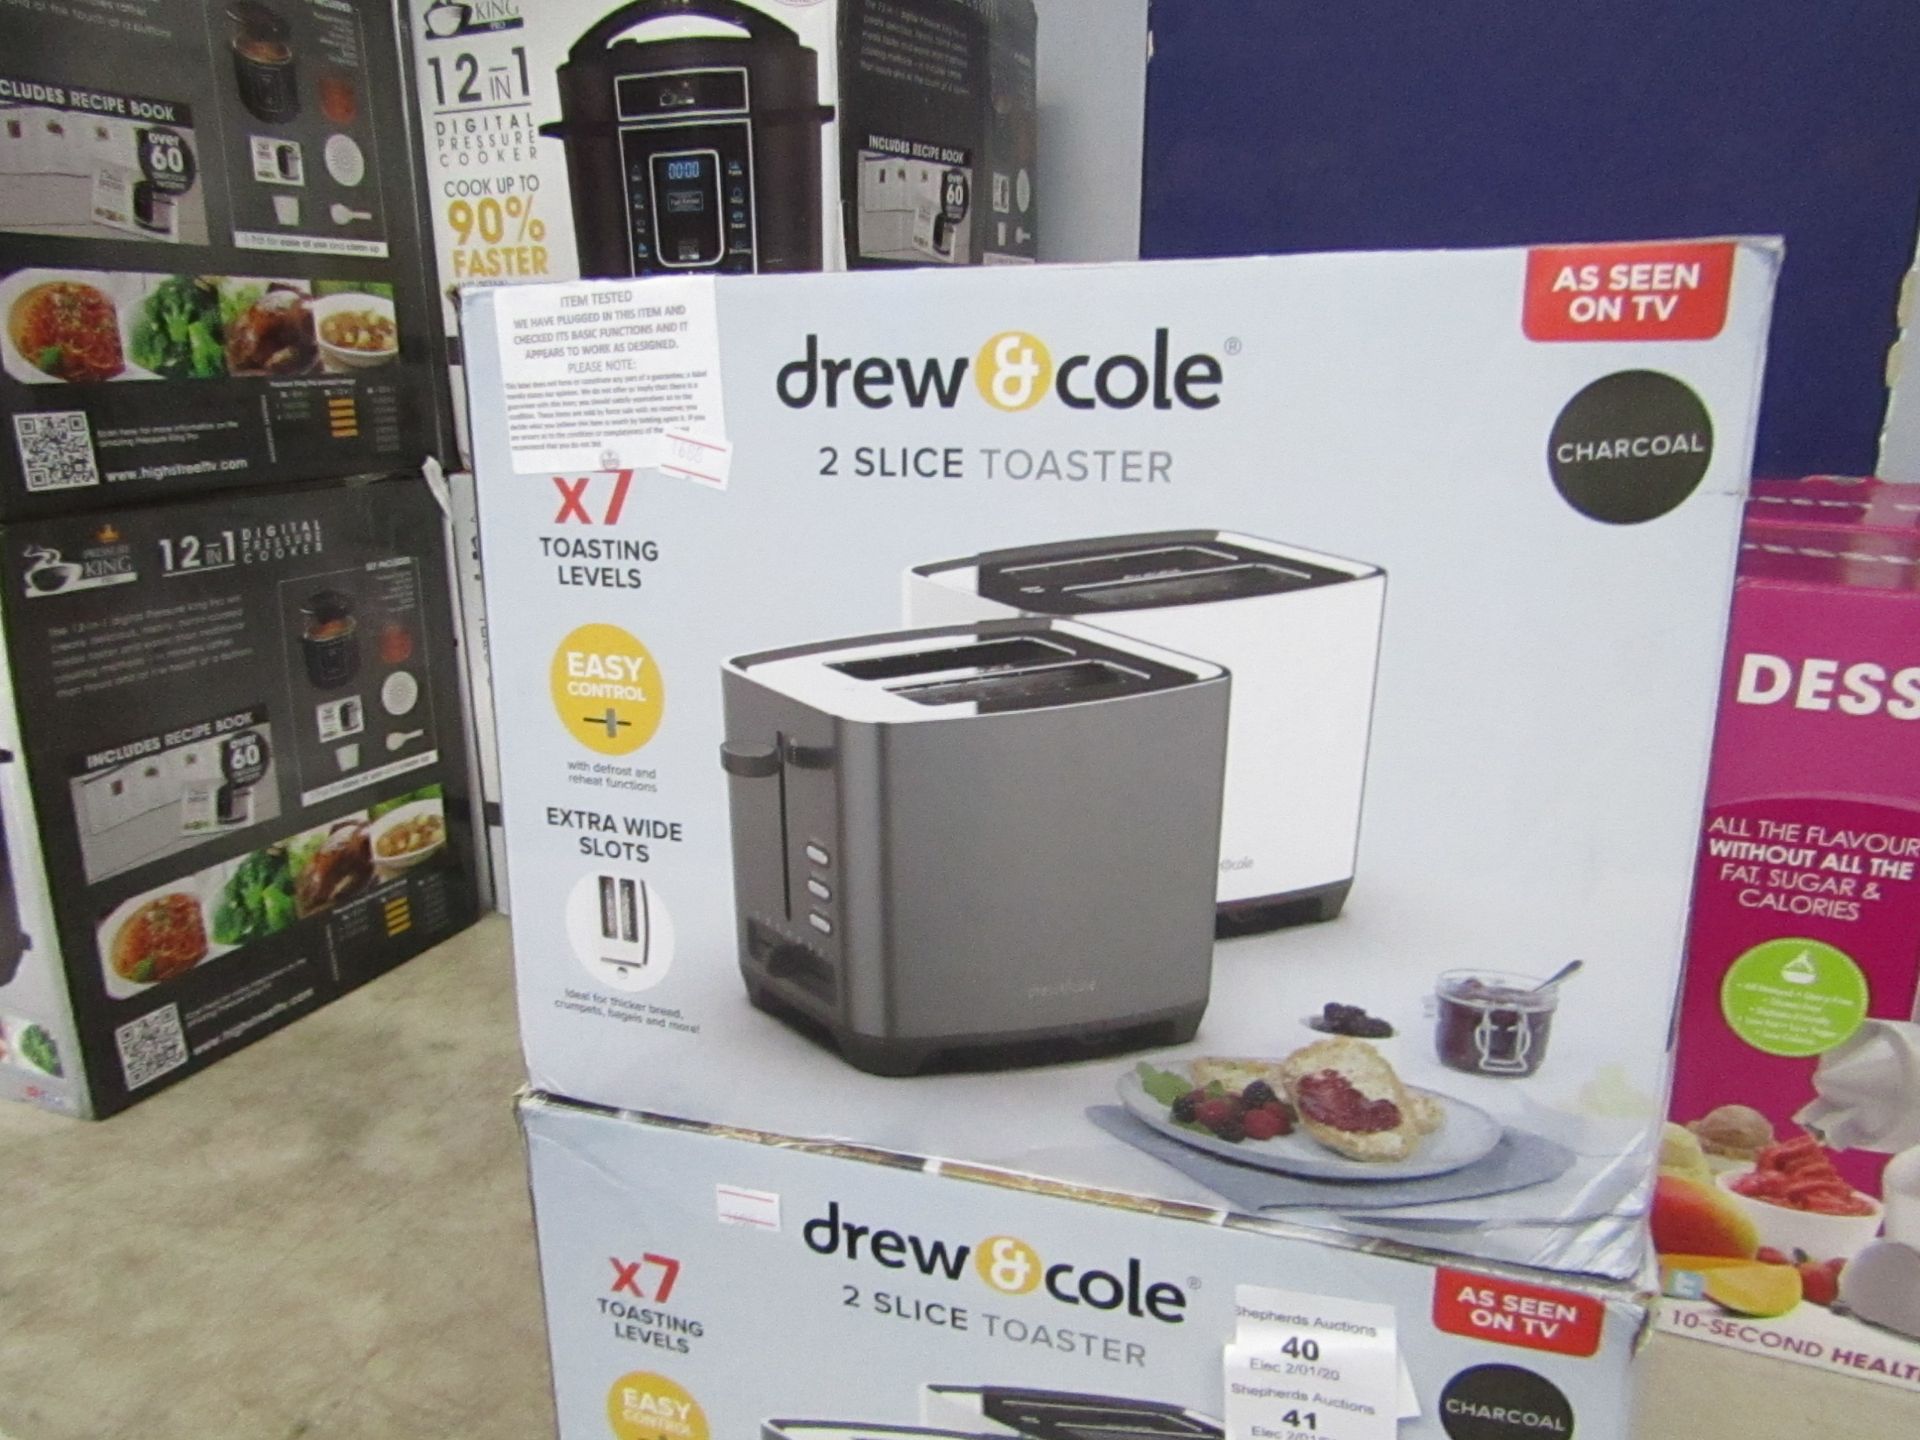 | 1x | drew&cole toaster 2 slice charcoal | tested working and boxed - unchecked for accessories |